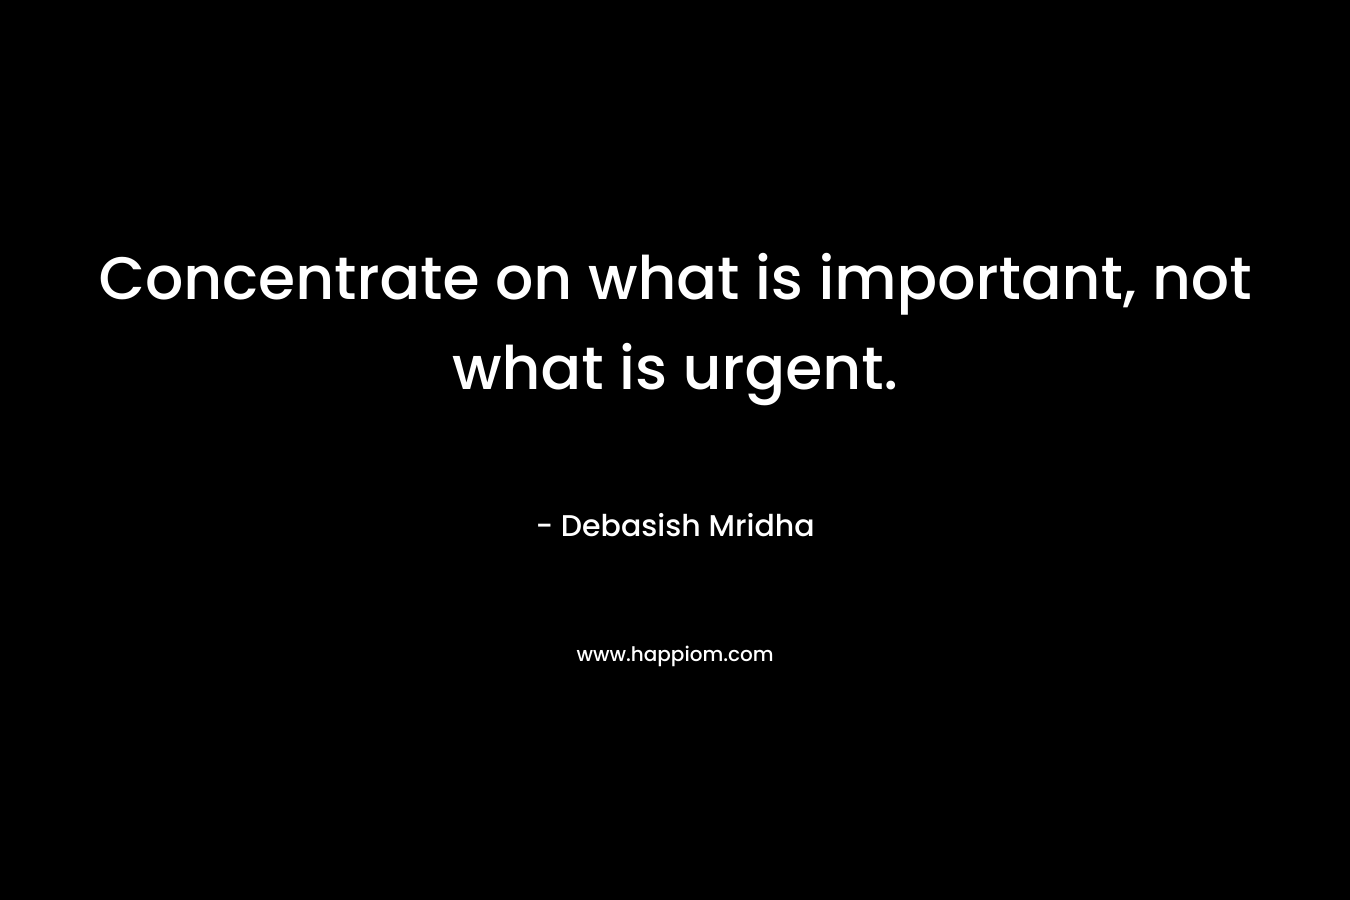 Concentrate on what is important, not what is urgent.